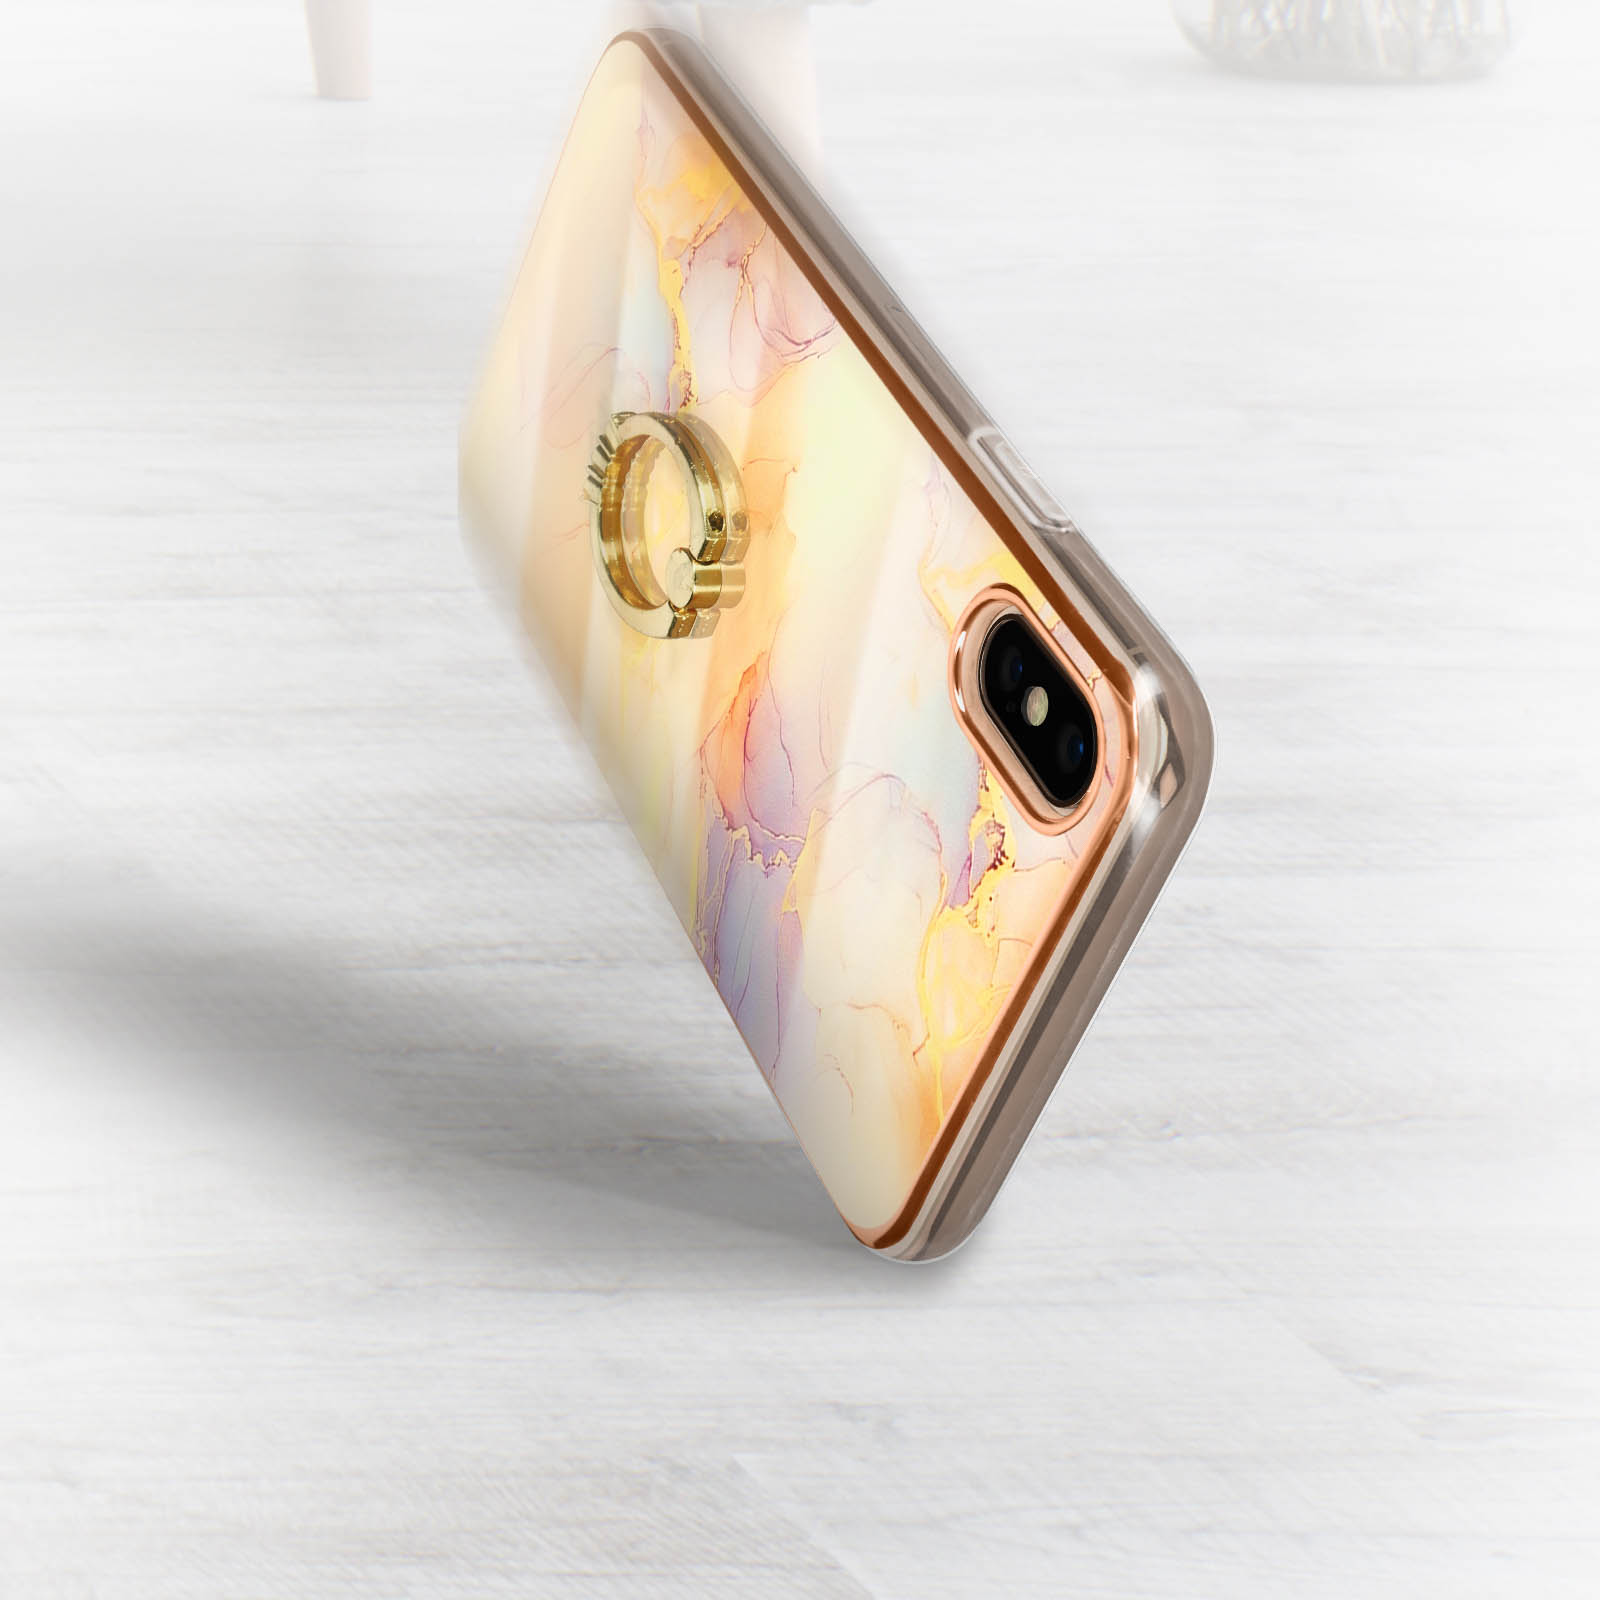 AVIZAR Marmormuster Series, Backcover, Apple, Max, Rosegold XS iPhone